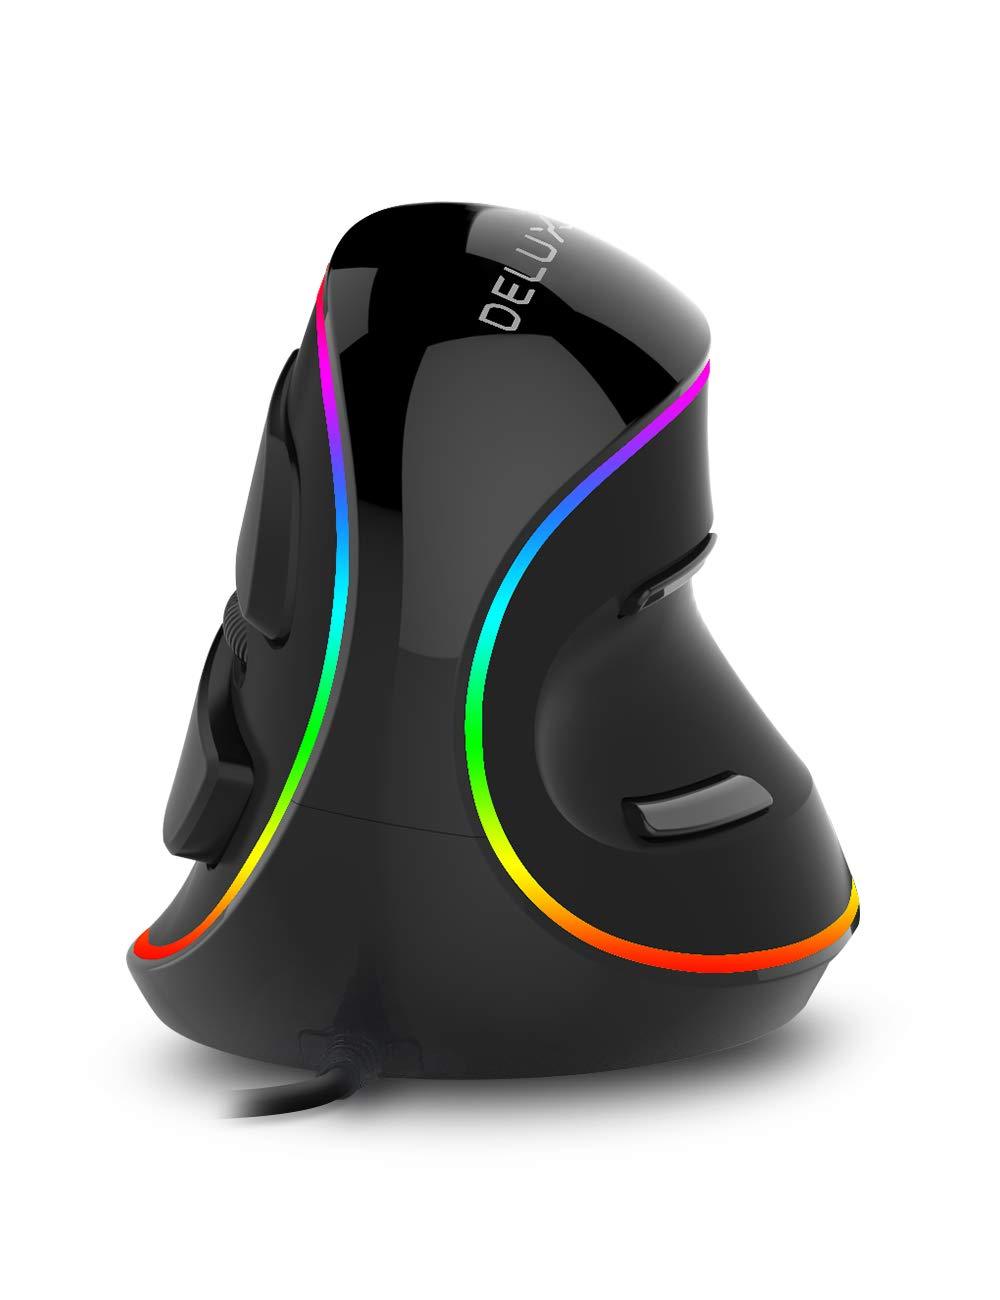  [AUSTRALIA] - DELUX Wired Ergonomic Vertical Mouse, Large RGB Ergonomic Computer Mouse with 6 Buttons, Removable Wrist Rest, 4000DPI and On-Board Software Reduce Hand Strain,for Carpal Tunnel(M618Plus RGB-Black) Wired with RGB